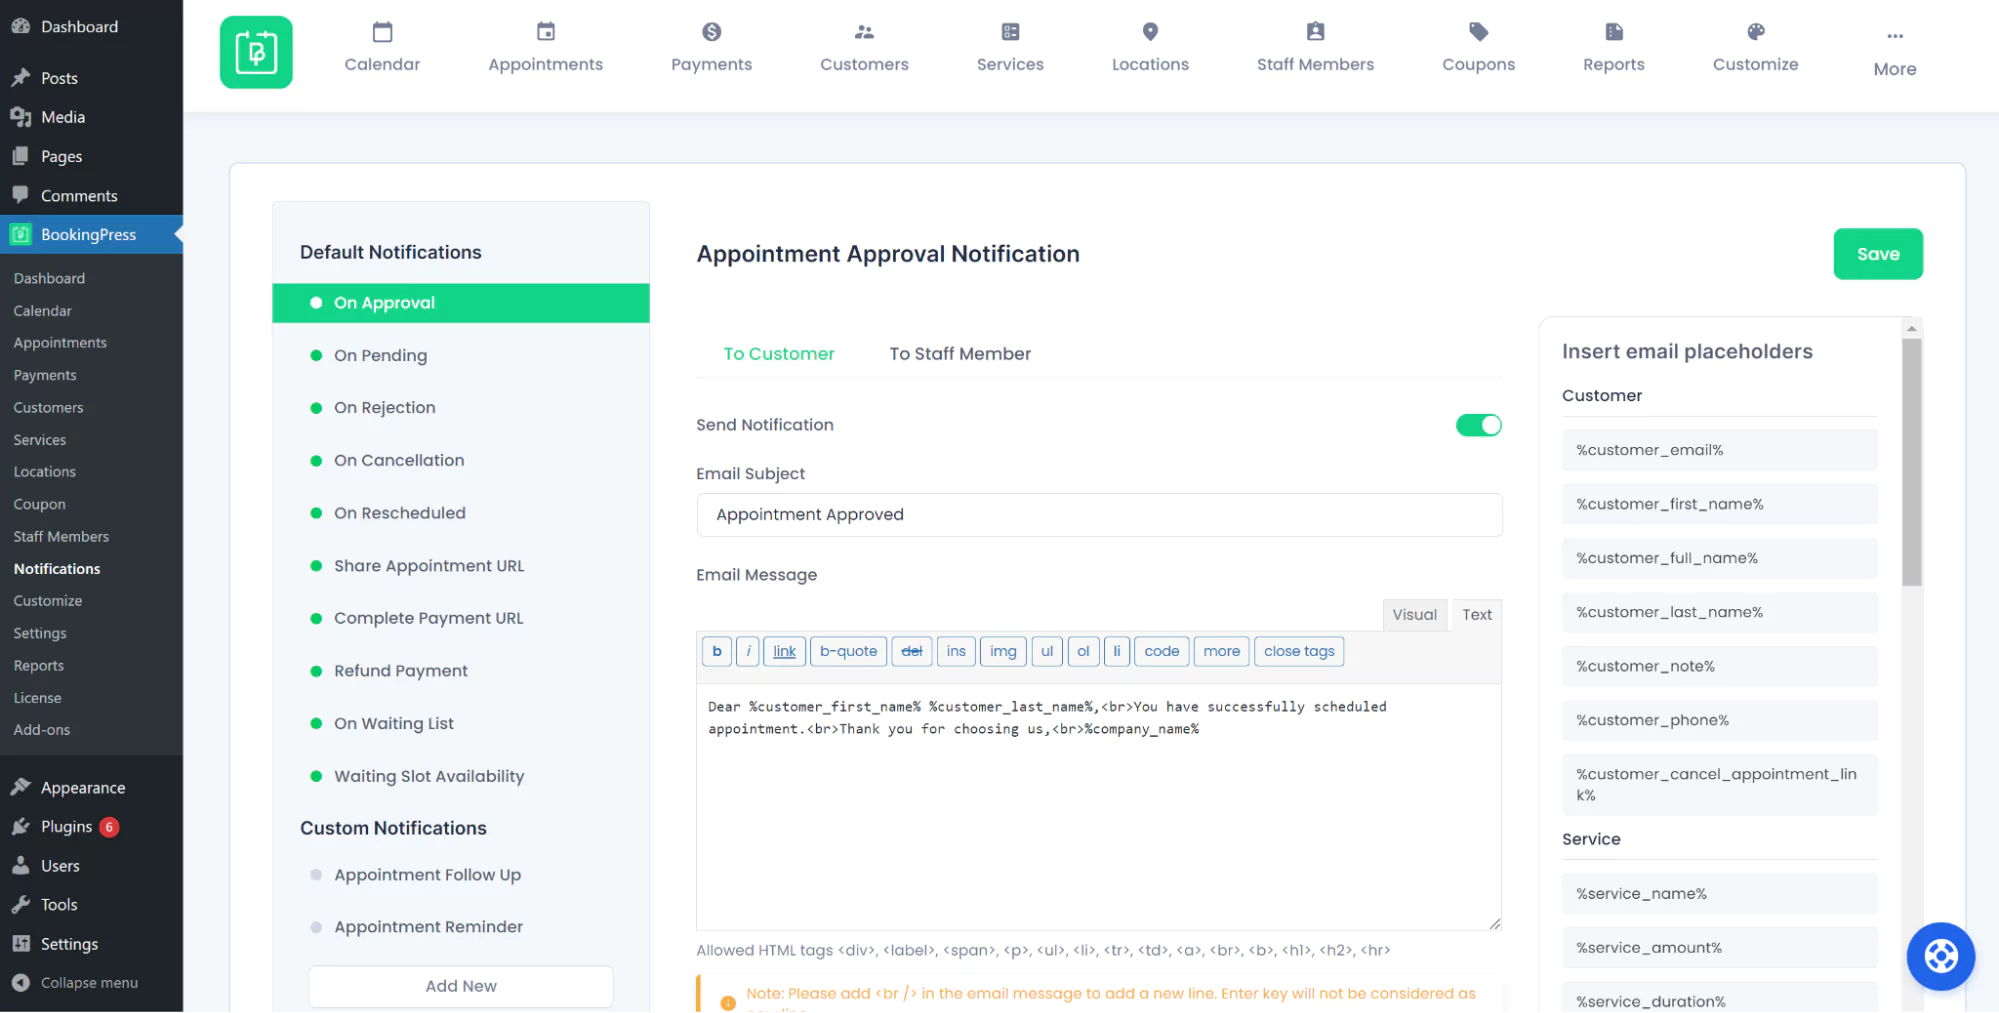 Appointment approval notification page